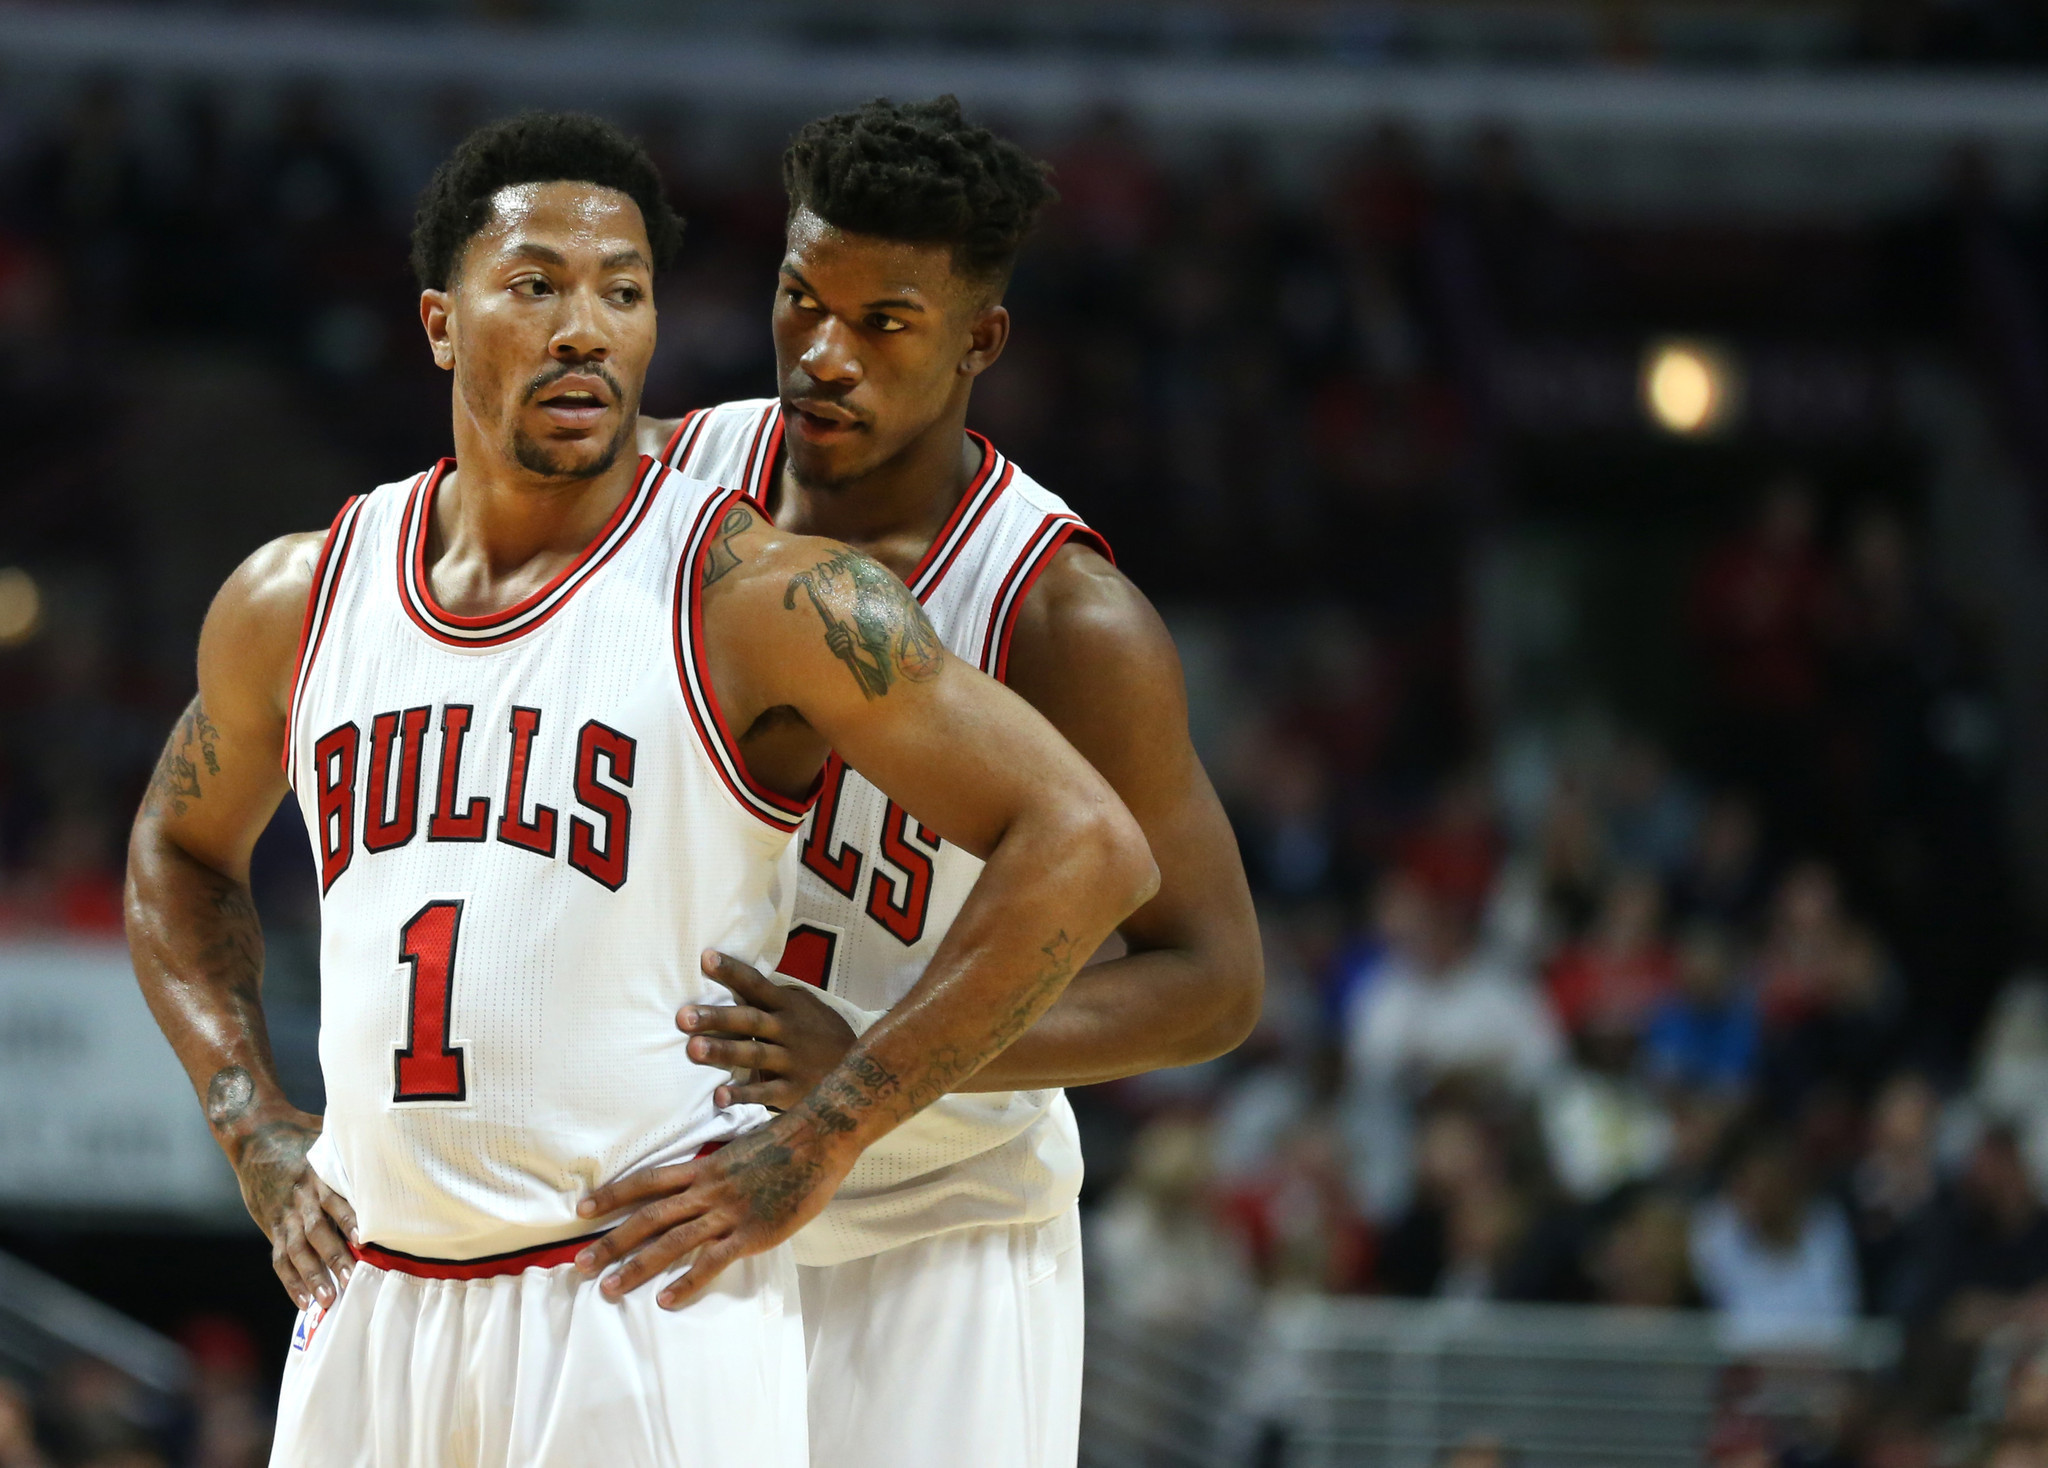 Most important thing is how Jimmy Butler, Derrick Rose do on the court – Chicago Tribune